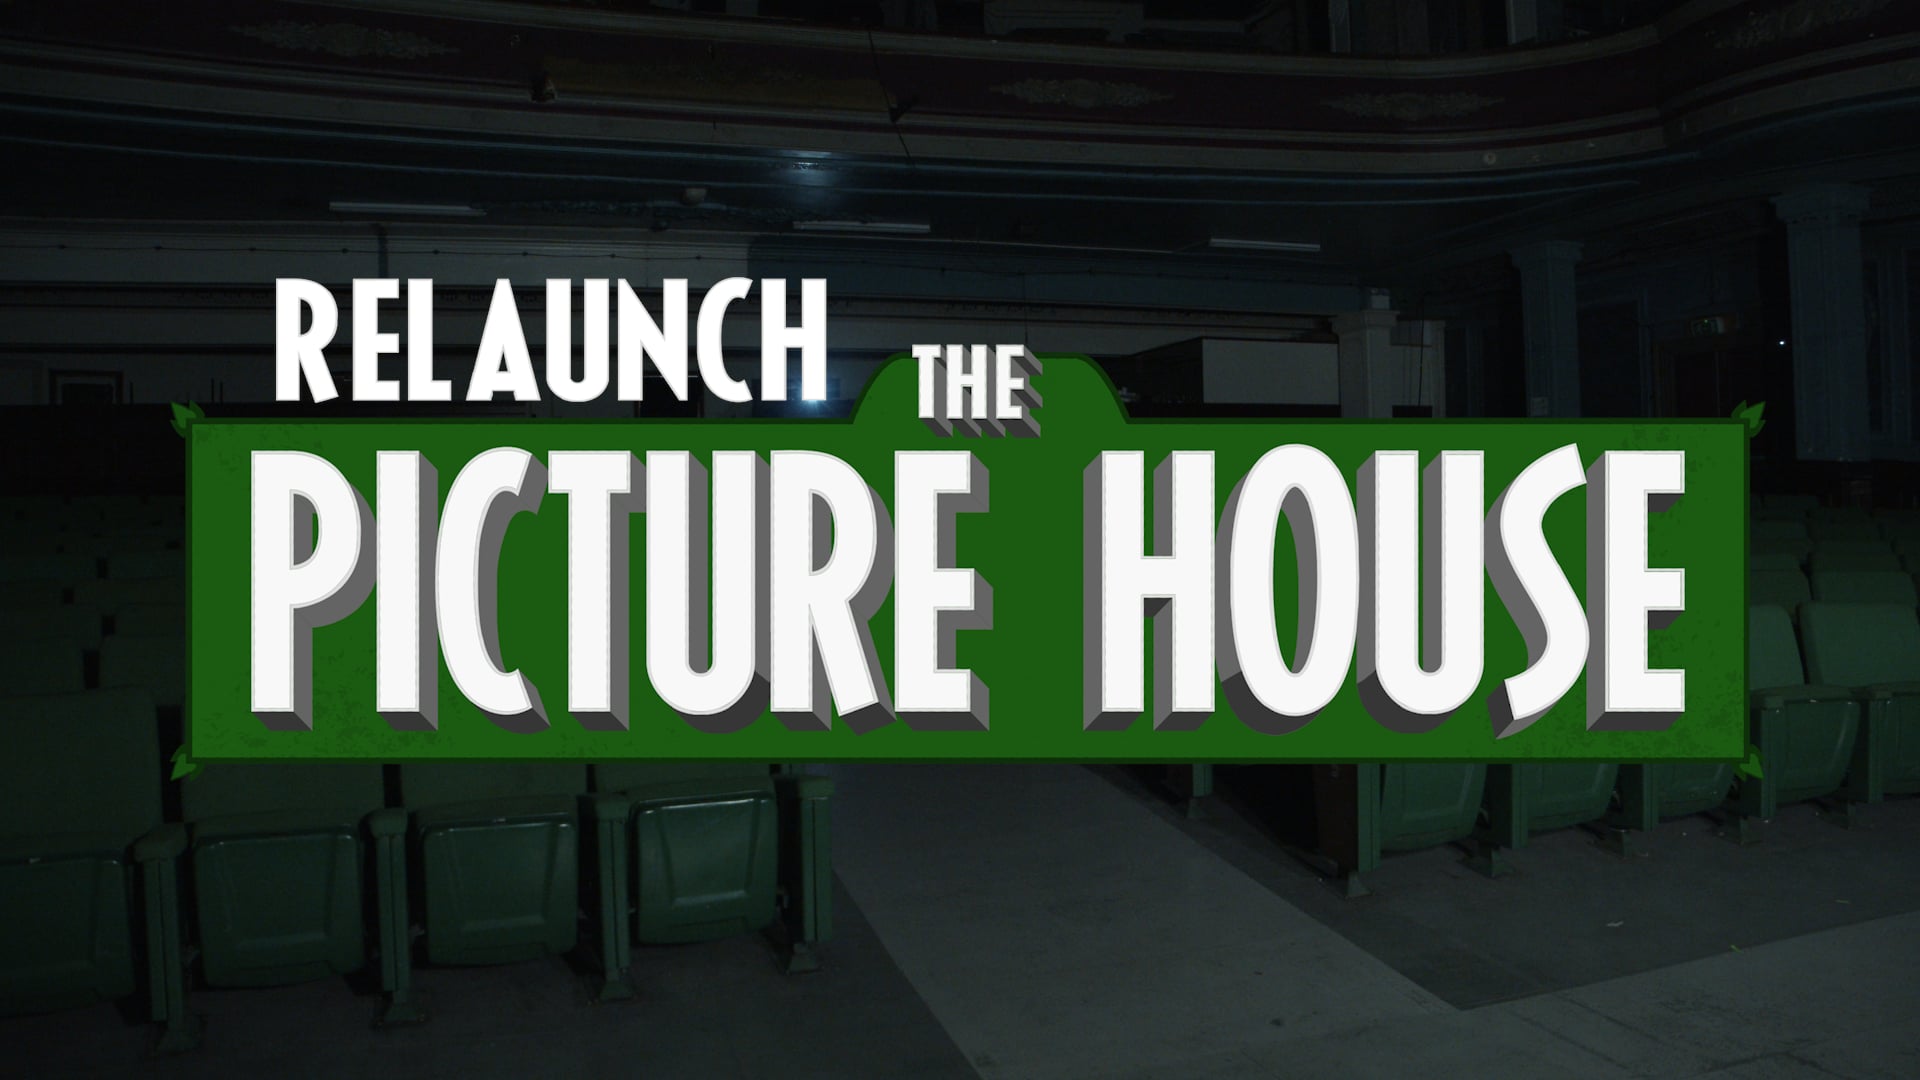 #RelaunchThePictureHouse